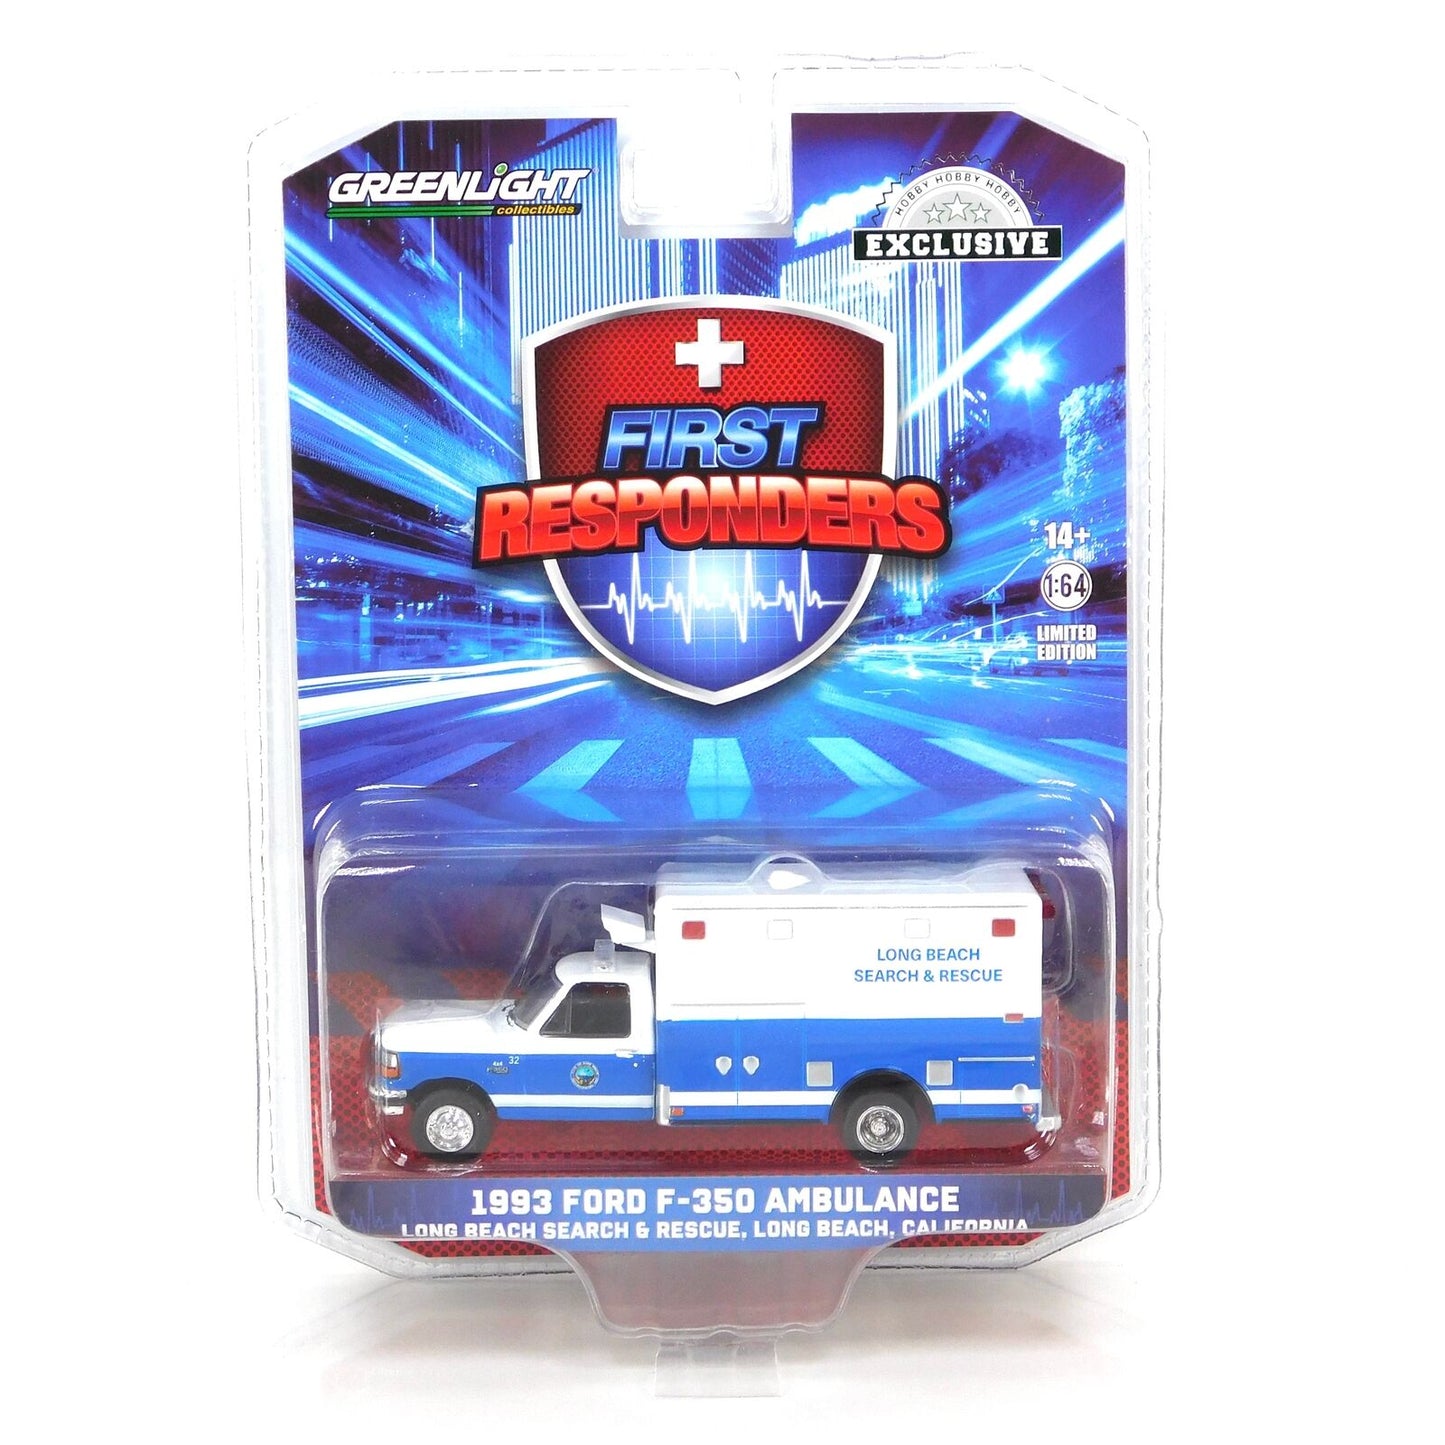 GreenLight 1:64 First Responders - 1993 Ford F-350 Ambulance - Long Beach Search & Rescue, Long Beach, California 67062